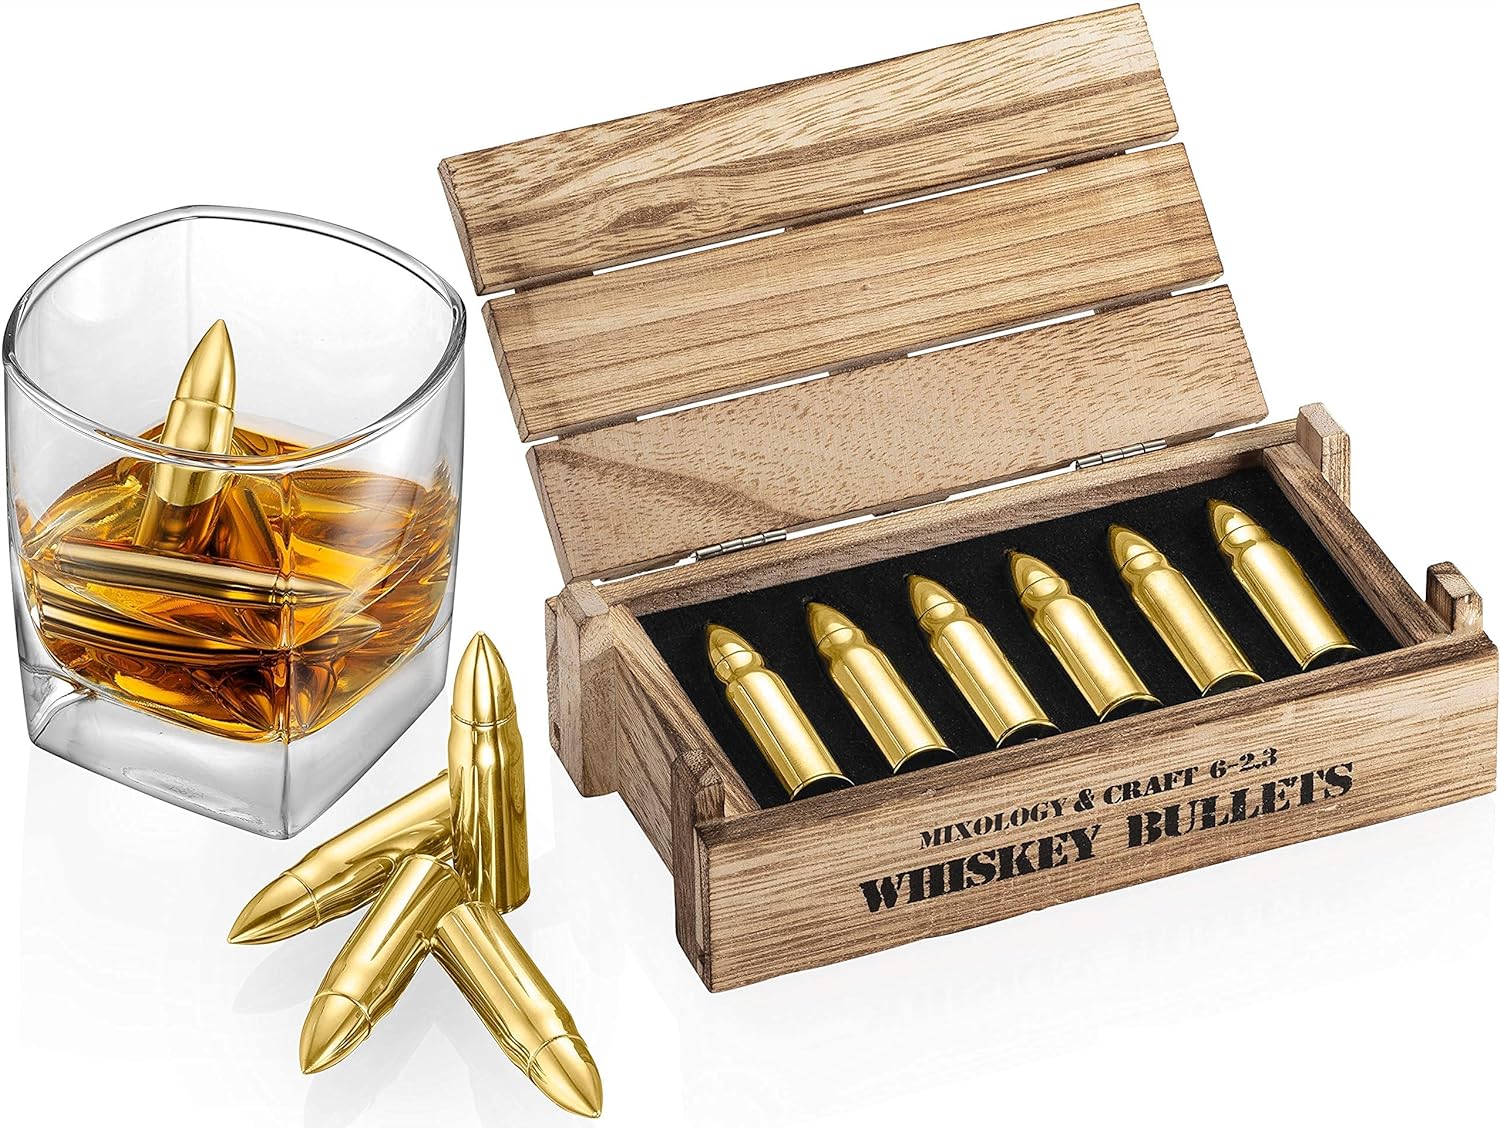 The packaging is careful and well thought out, and the product is true to photo. The whiskey stones are of amazing quality and clean easily. Our package came with some extraneous glue, but taking it off the stones is more than easy.